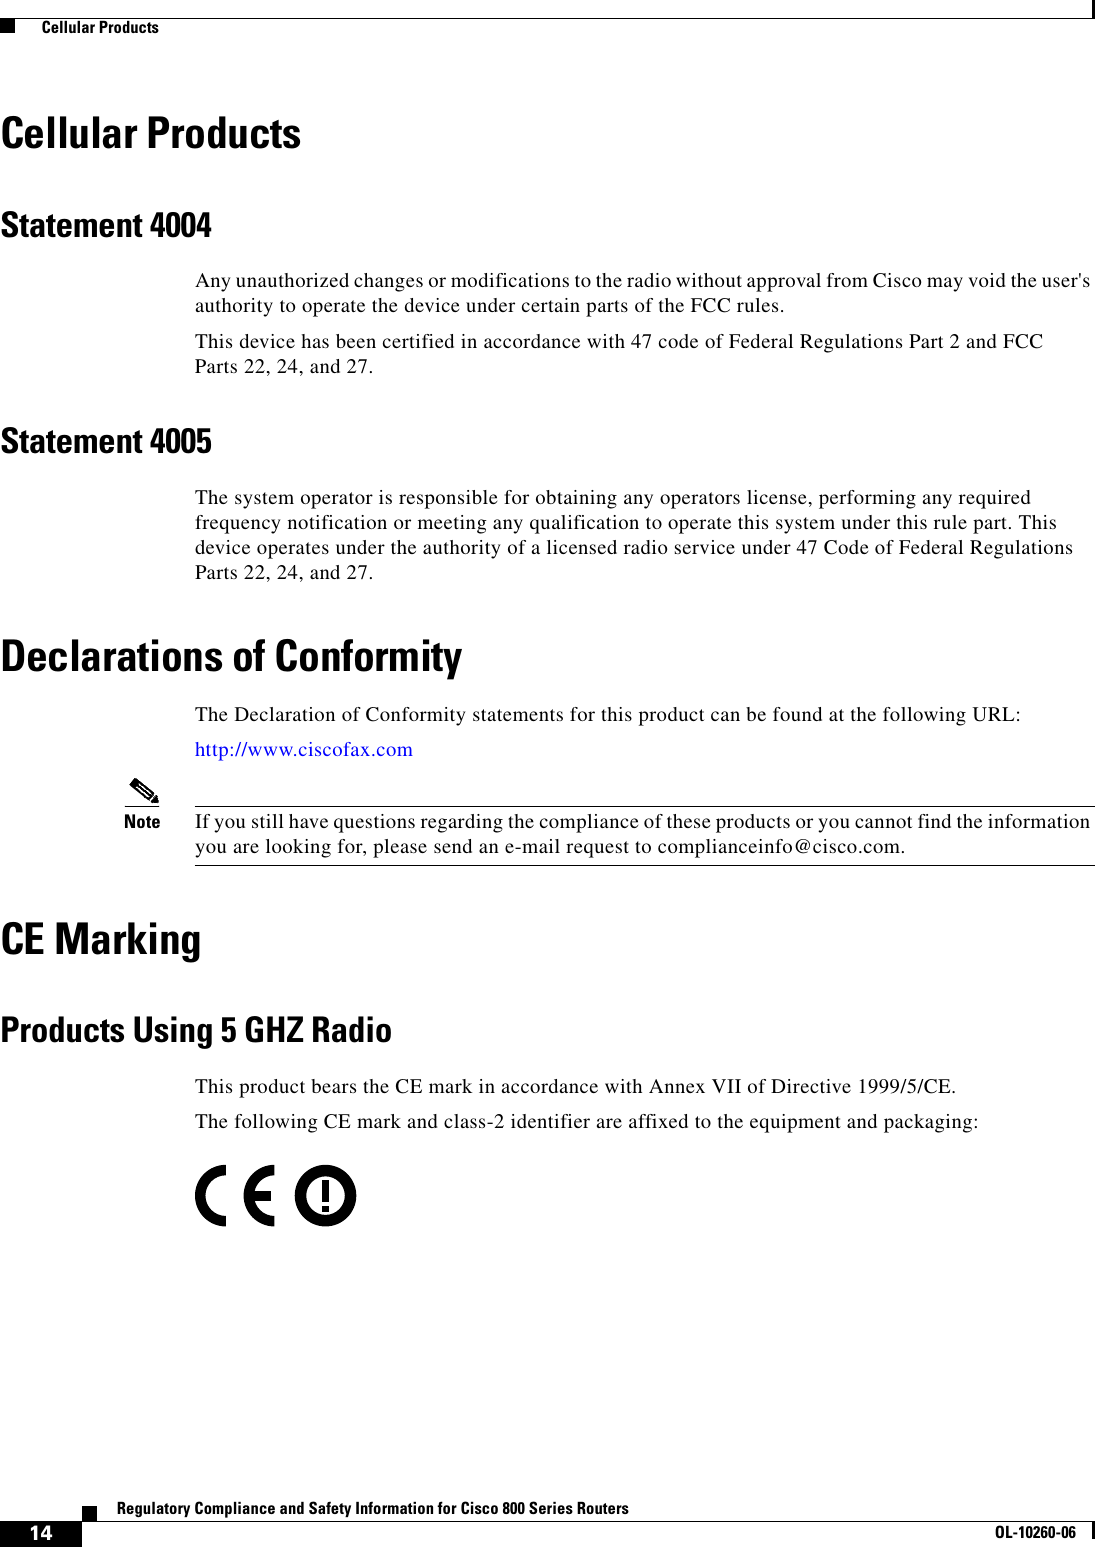 14Regulatory Compliance and Safety Information for Cisco 800 Series RoutersOL-10260-06  Cellular ProductsCellular ProductsStatement 4004Any unauthorized changes or modifications to the radio without approval from Cisco may void the user&apos;s authority to operate the device under certain parts of the FCC rules.This device has been certified in accordance with 47 code of Federal Regulations Part 2 and FCC Parts 22, 24, and 27.Statement 4005The system operator is responsible for obtaining any operators license, performing any required frequency notification or meeting any qualification to operate this system under this rule part. This device operates under the authority of a licensed radio service under 47 Code of Federal Regulations Parts 22, 24, and 27.Declarations of ConformityThe Declaration of Conformity statements for this product can be found at the following URL:http://www.ciscofax.comNote If you still have questions regarding the compliance of these products or you cannot find the information you are looking for, please send an e-mail request to complianceinfo@cisco.com.CE MarkingProducts Using 5 GHZ RadioThis product bears the CE mark in accordance with Annex VII of Directive 1999/5/CE. The following CE mark and class-2 identifier are affixed to the equipment and packaging: